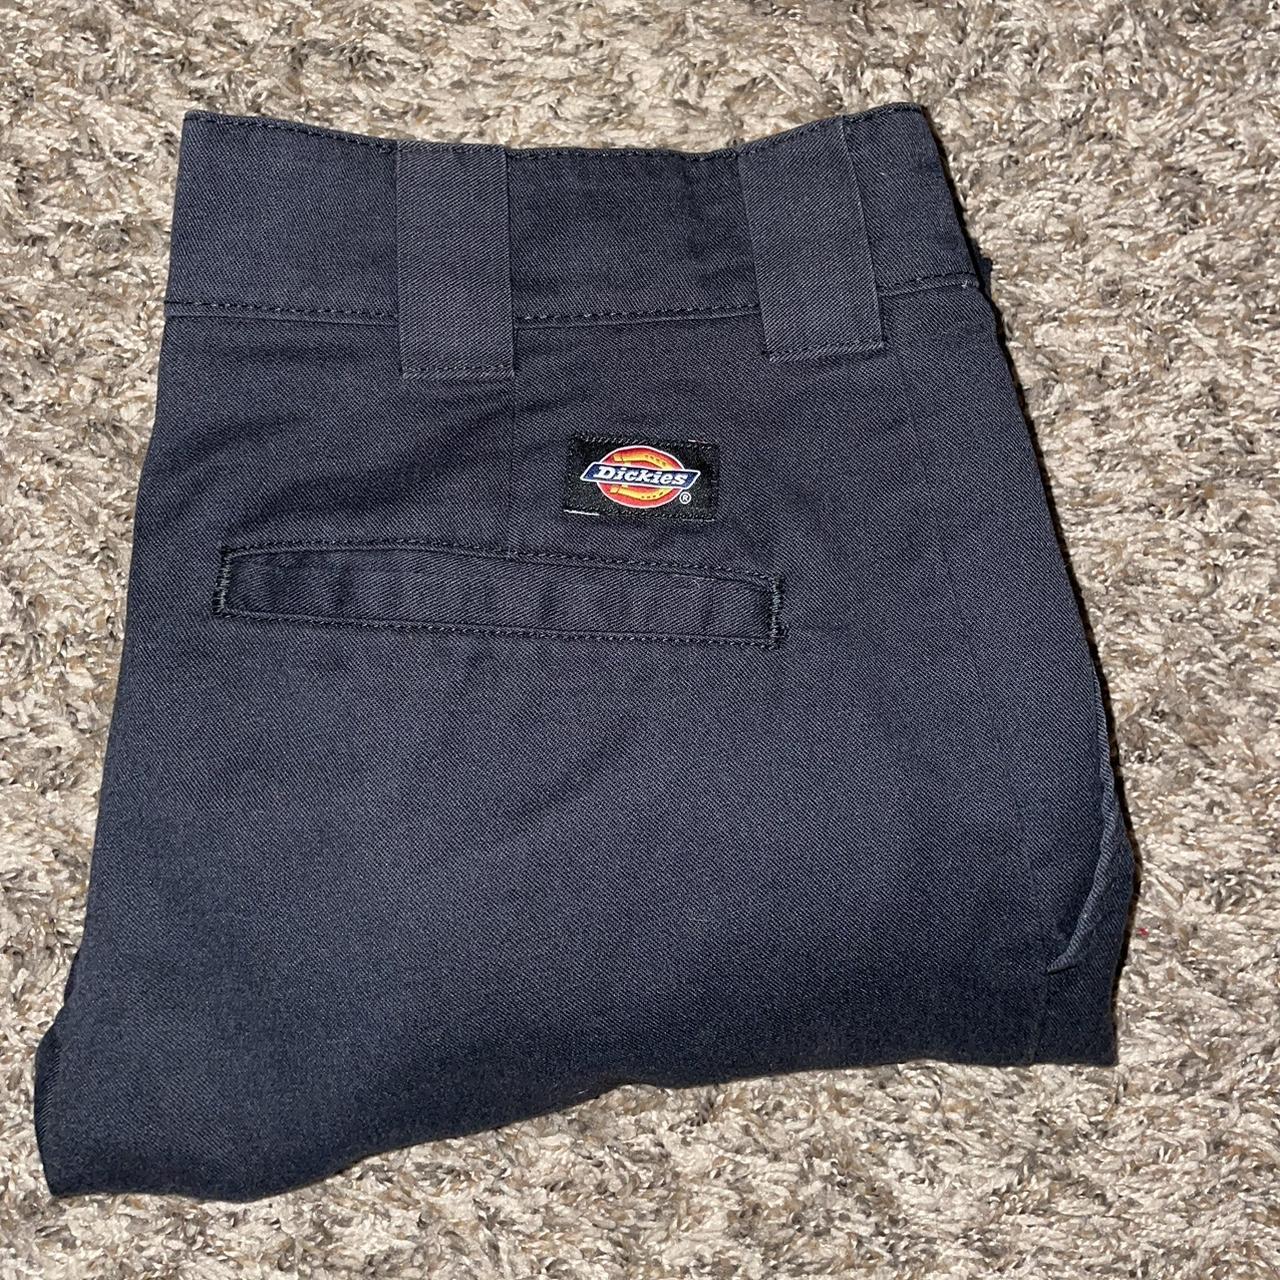 28x30 Dickies Flex! Black color and are in great... - Depop